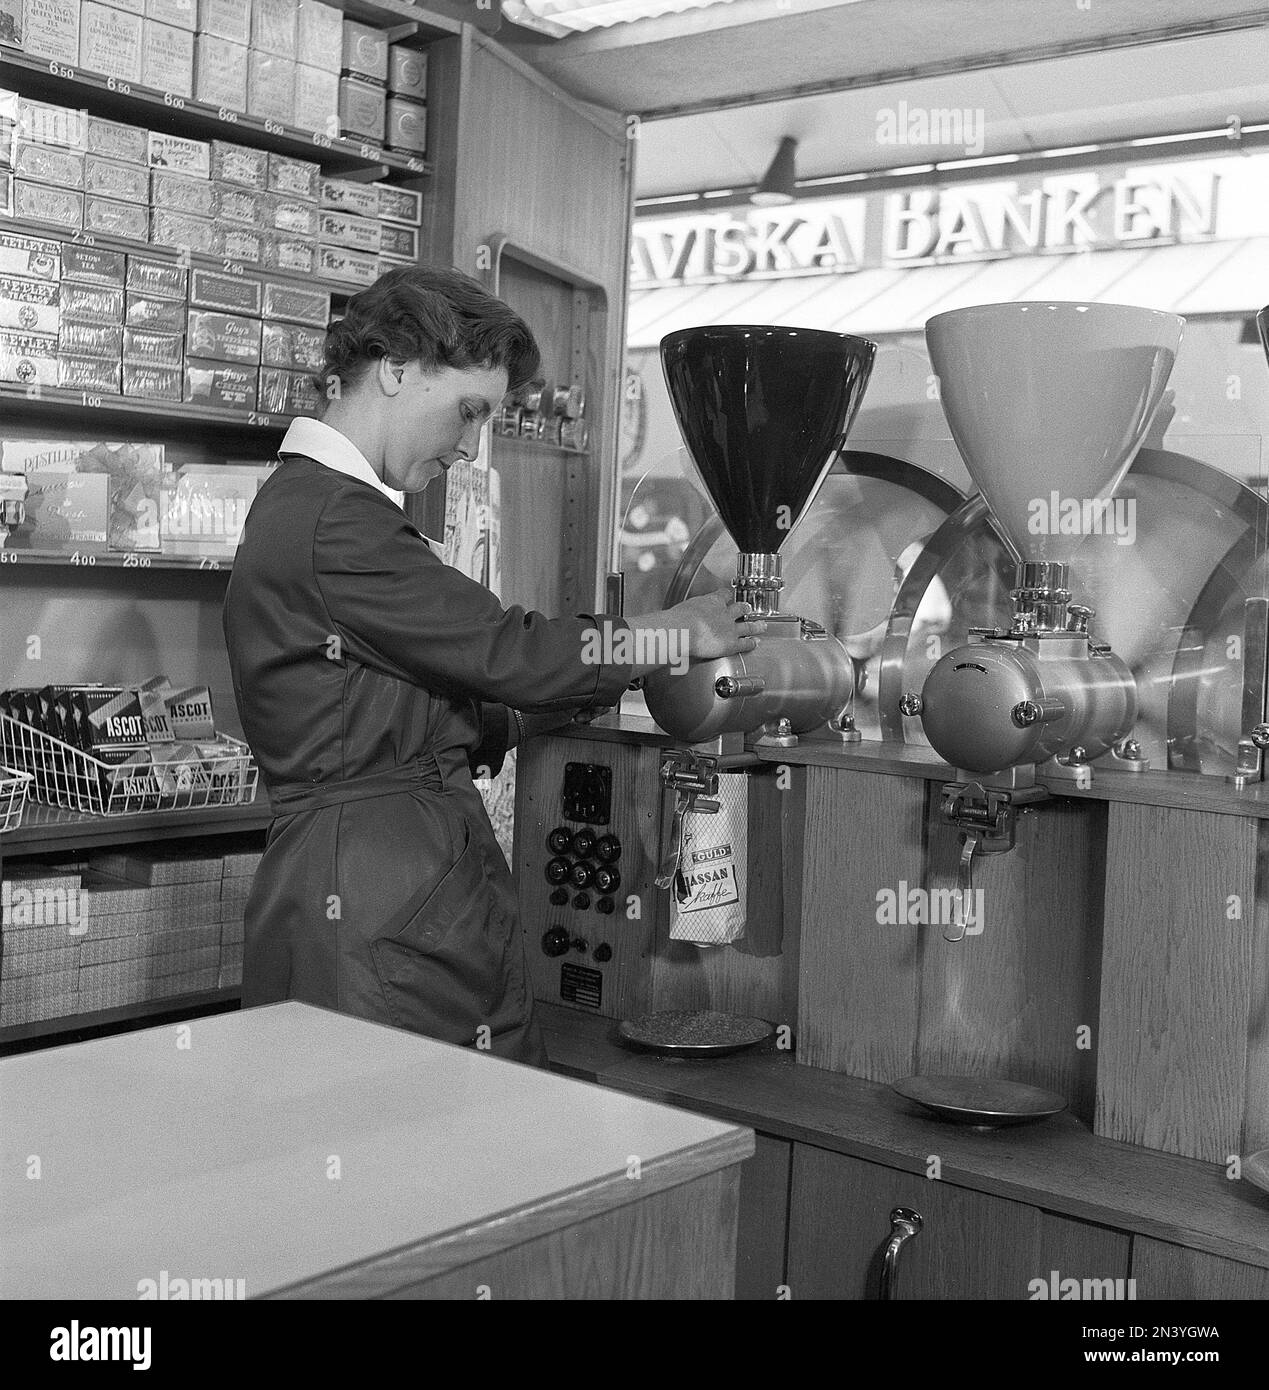 In the 1950s. A woman working in a store is seen grinding coffee beans into a paper bag.  Sweden 1958 ref BV100-5 Stock Photo